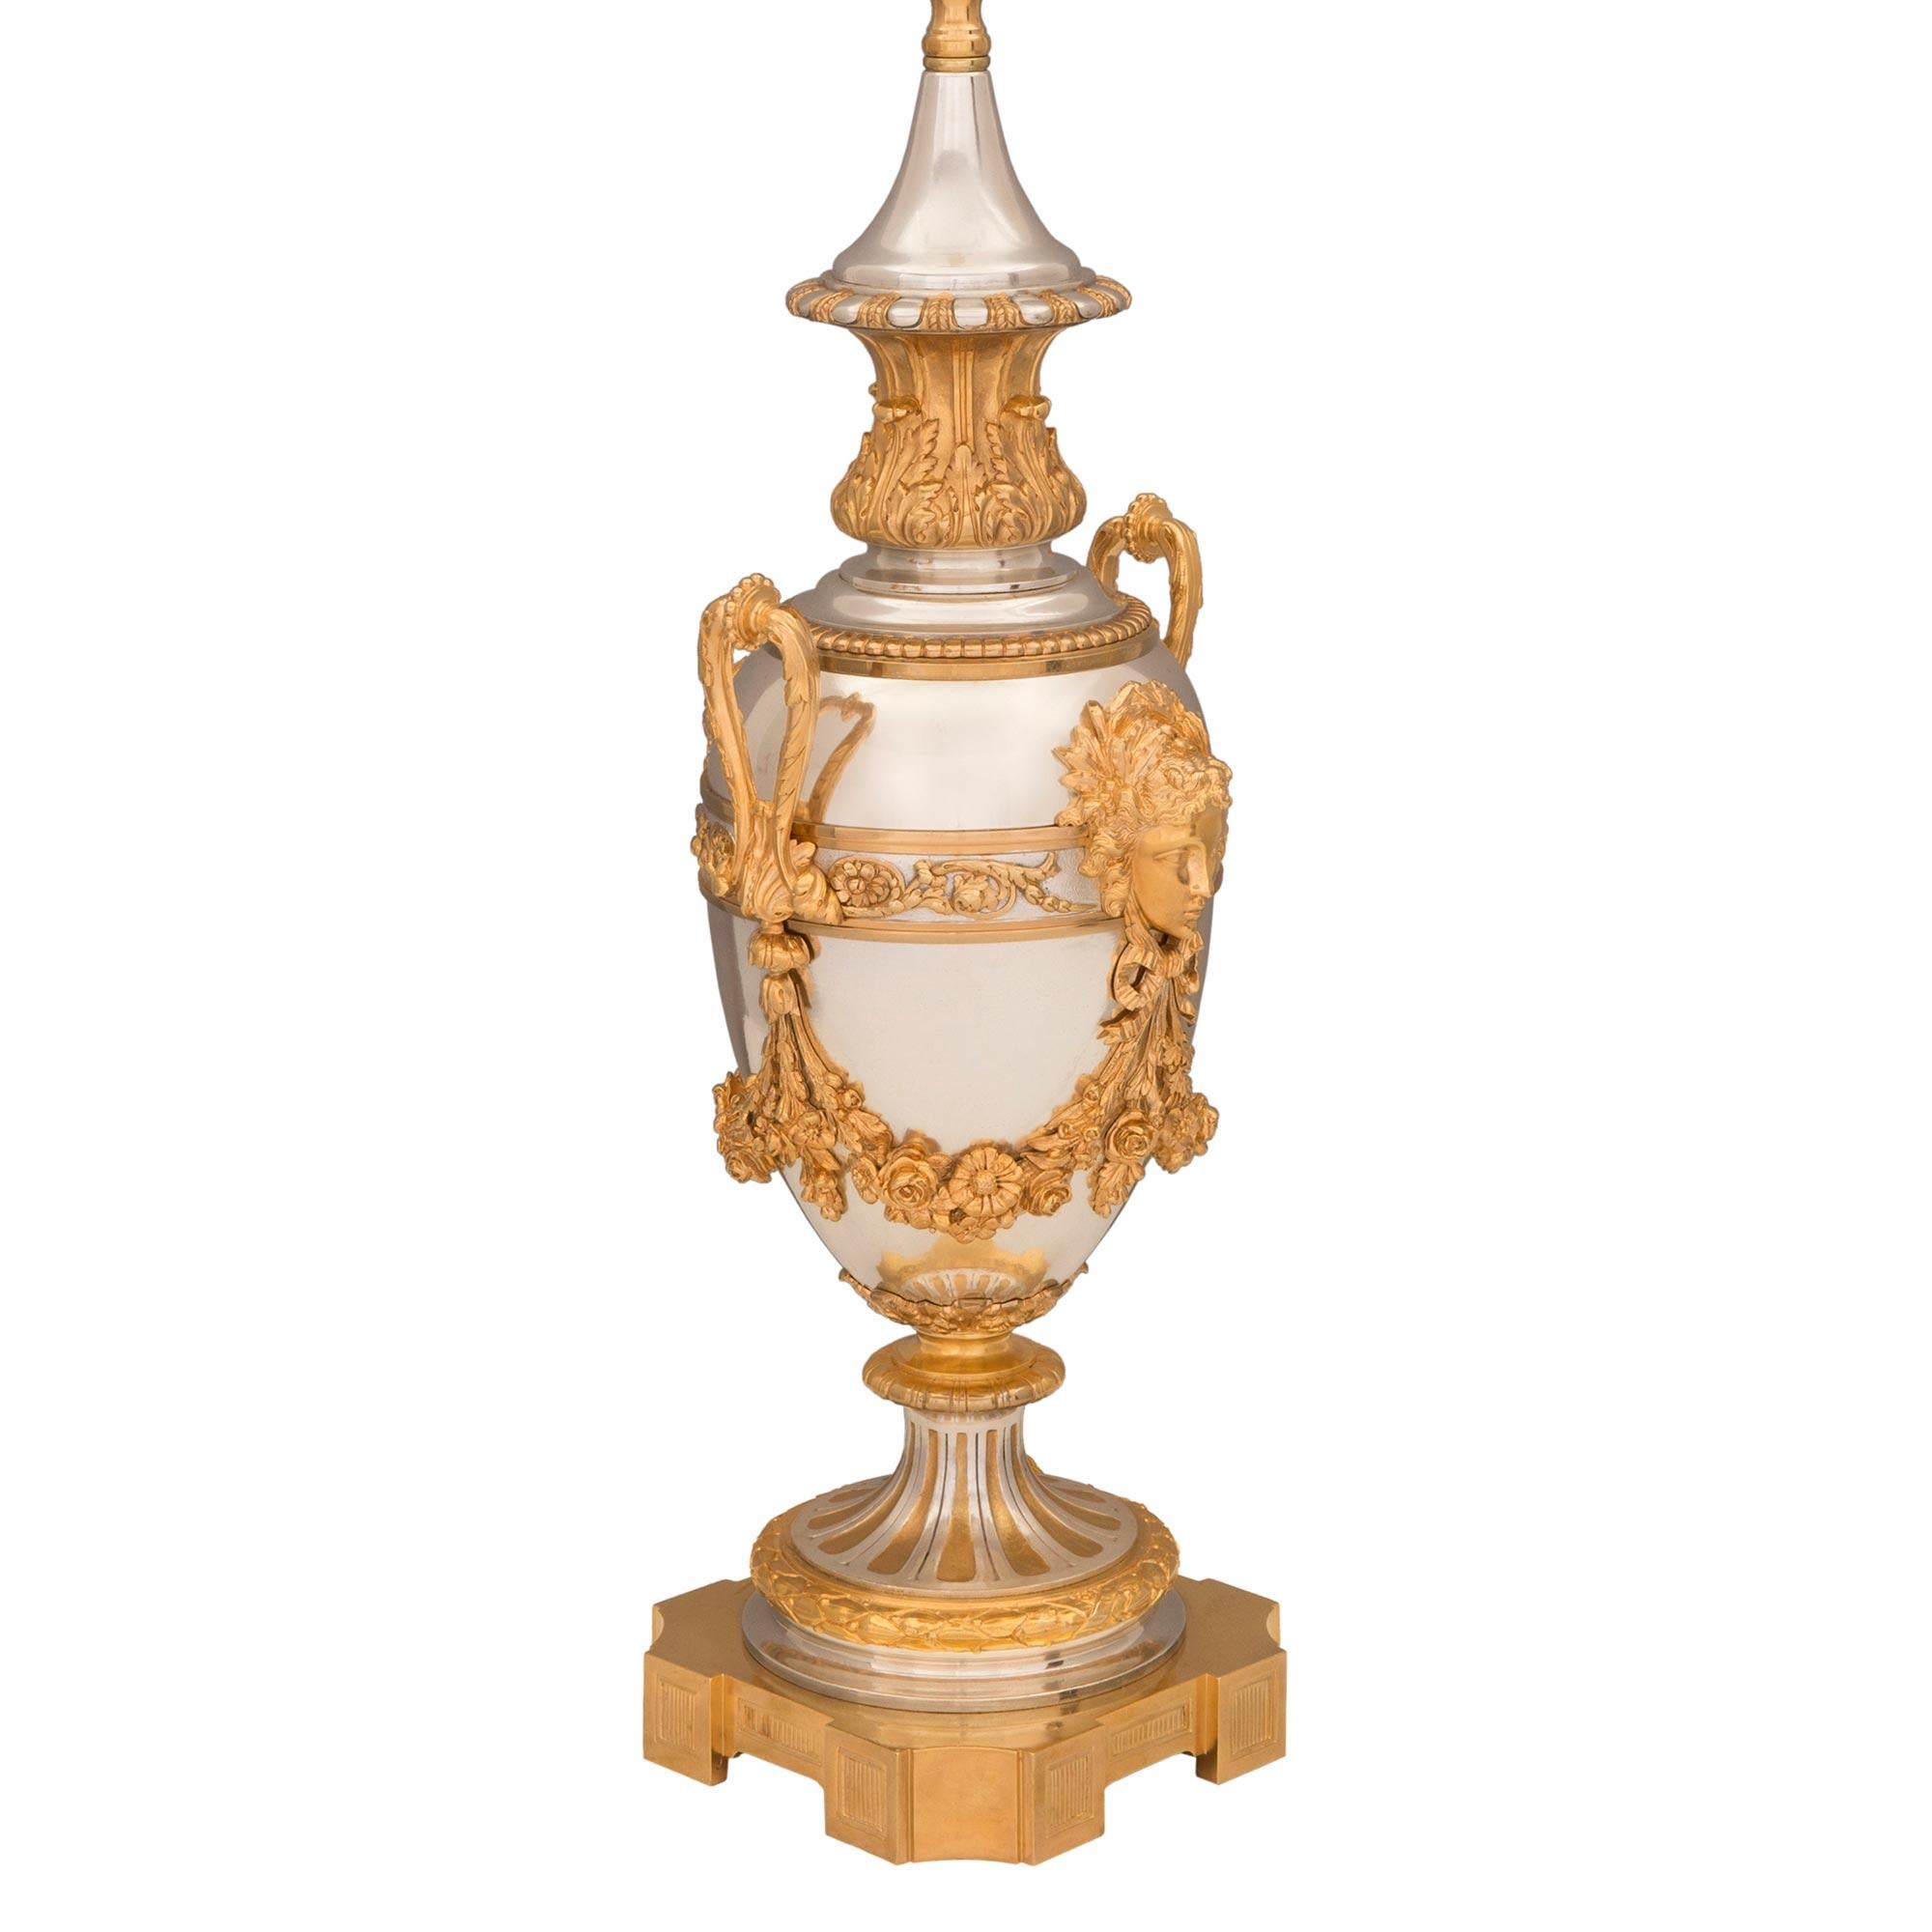 A superb and very high quality pair of French 19th century Louis XVI st. ormolu and silvered bronze lamps, signed by Victor Paillard. Each lamp is raised by elegant square bases with fine block designs and concave corners. The socle shaped pedestals